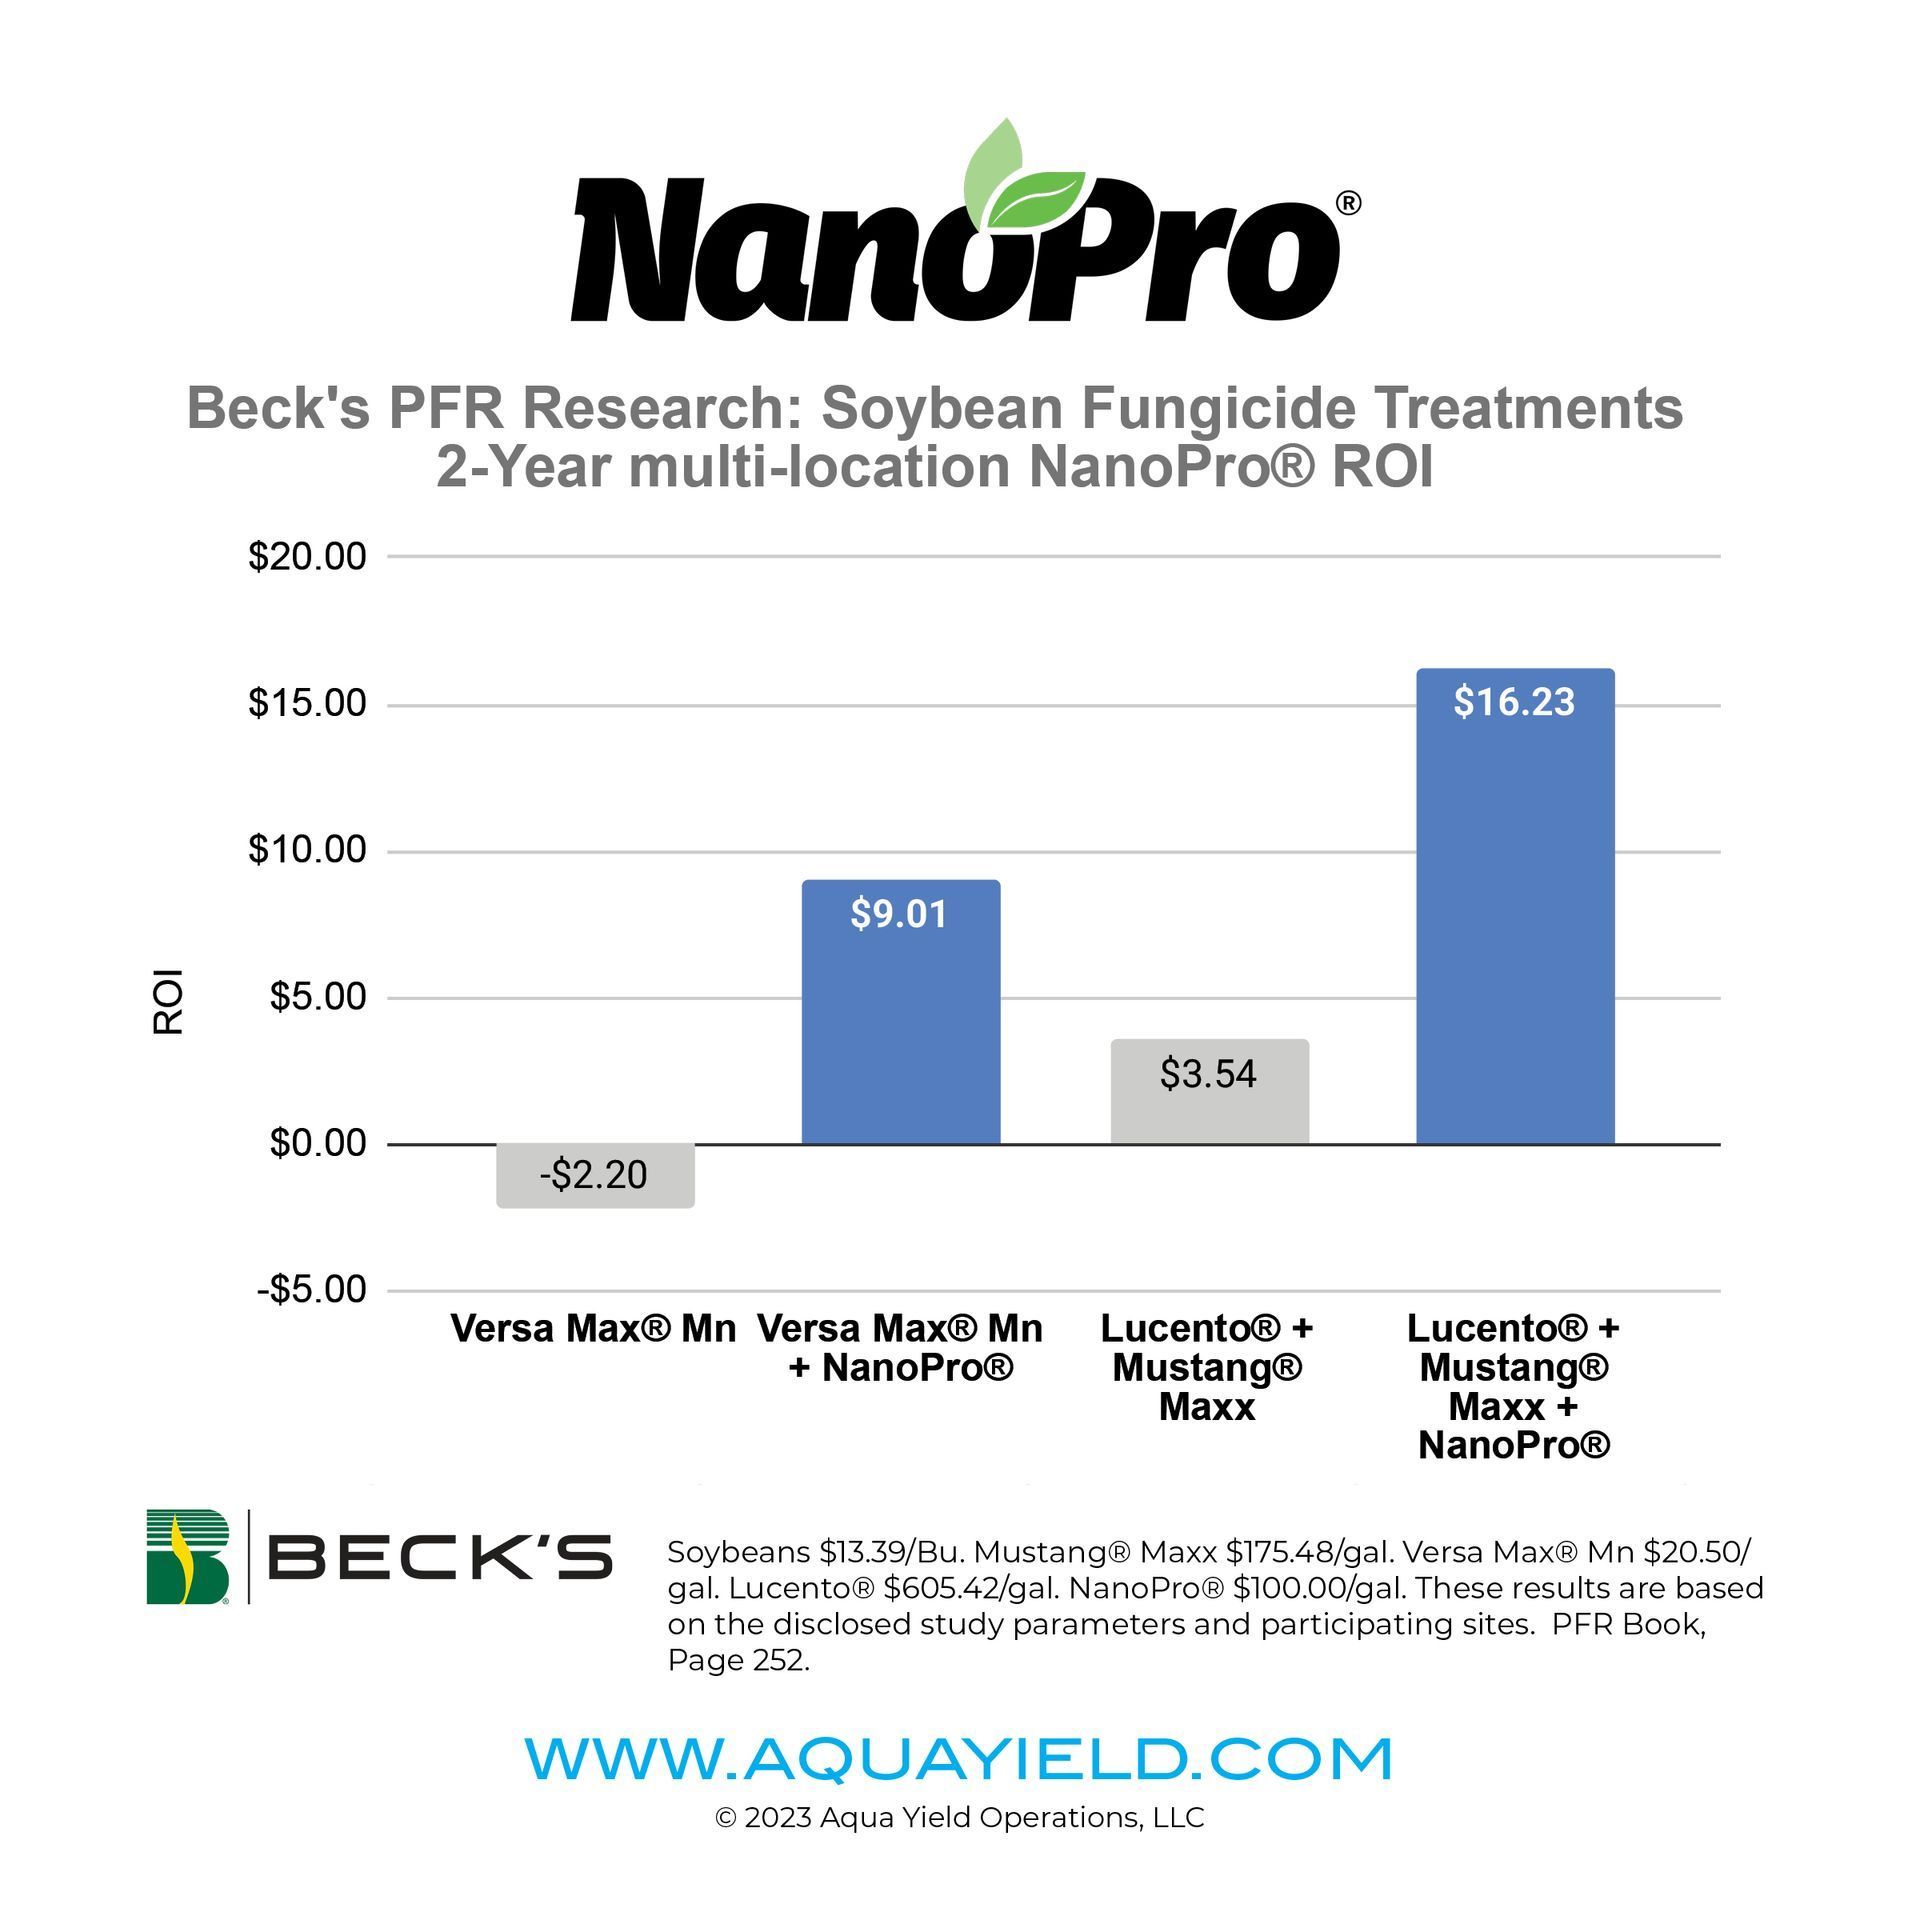 a graph showing beck 's pfr research on soybean fungicide treatments